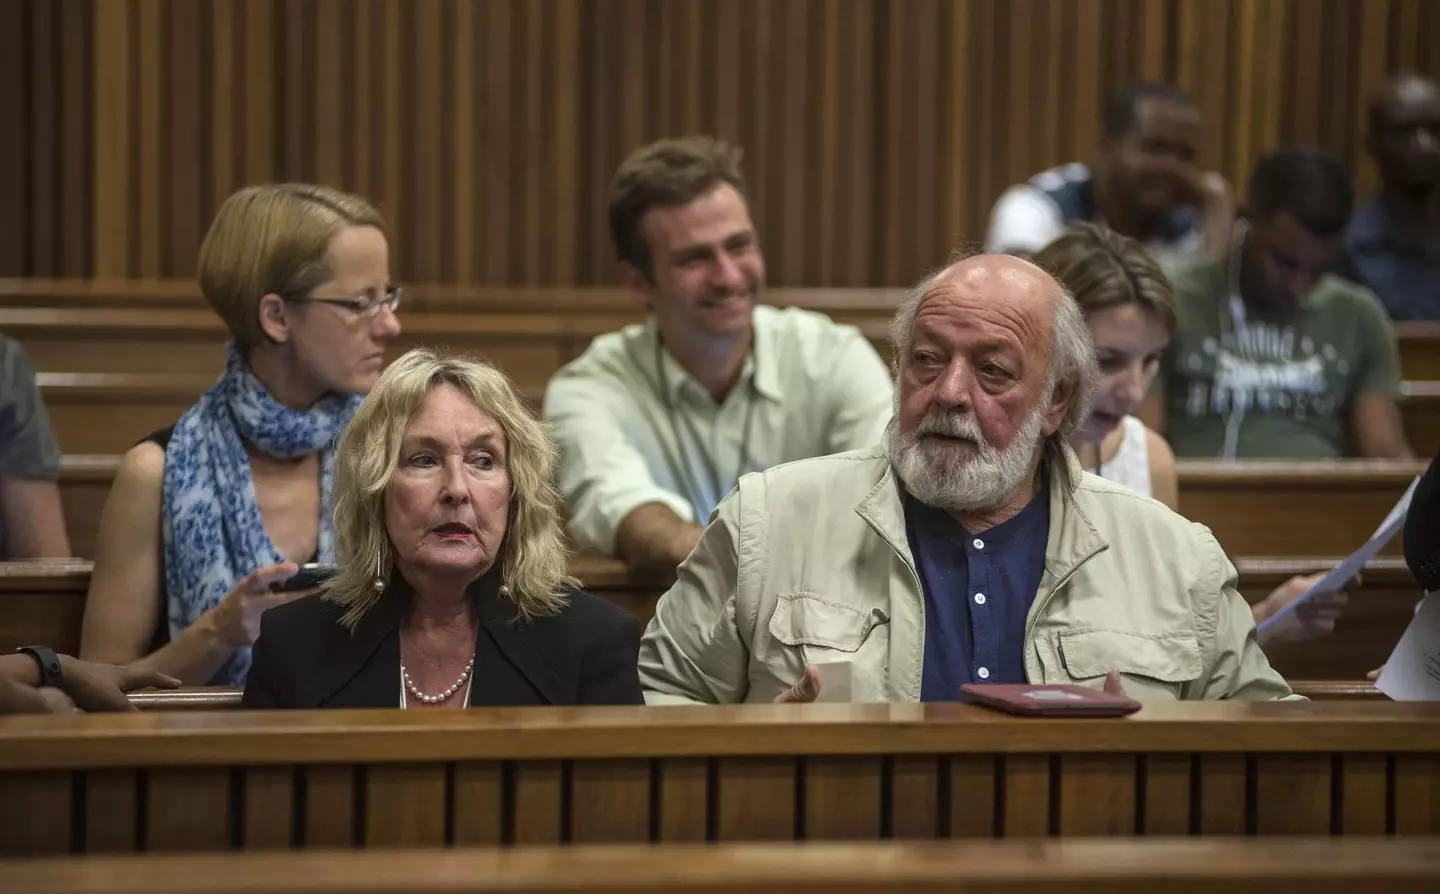 June and Barry Steenkamp, the parents of Reeva.